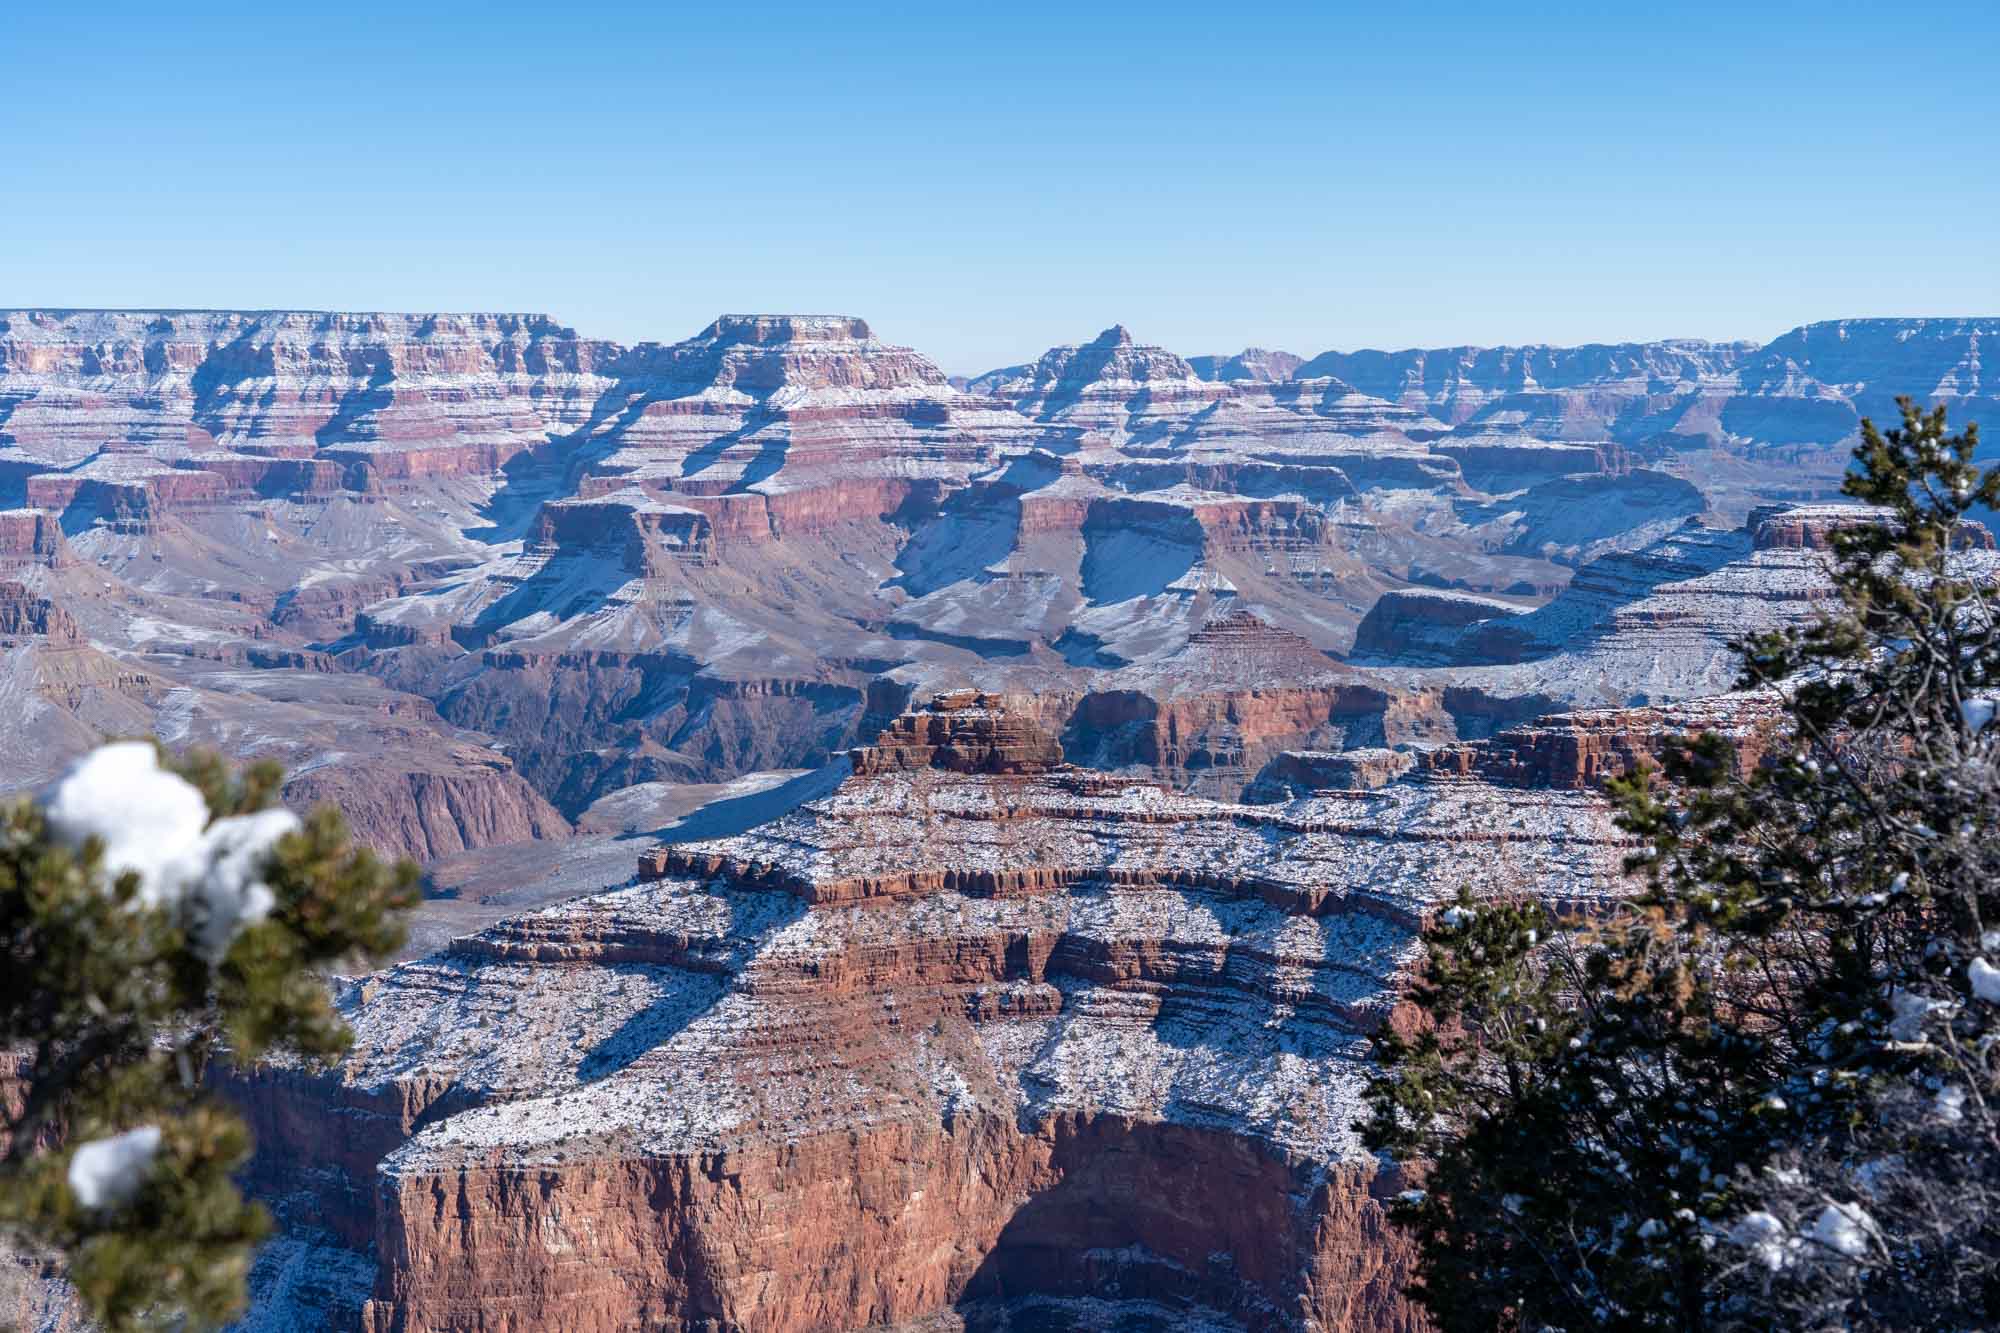 Can we visit Grand Canyon in winter?